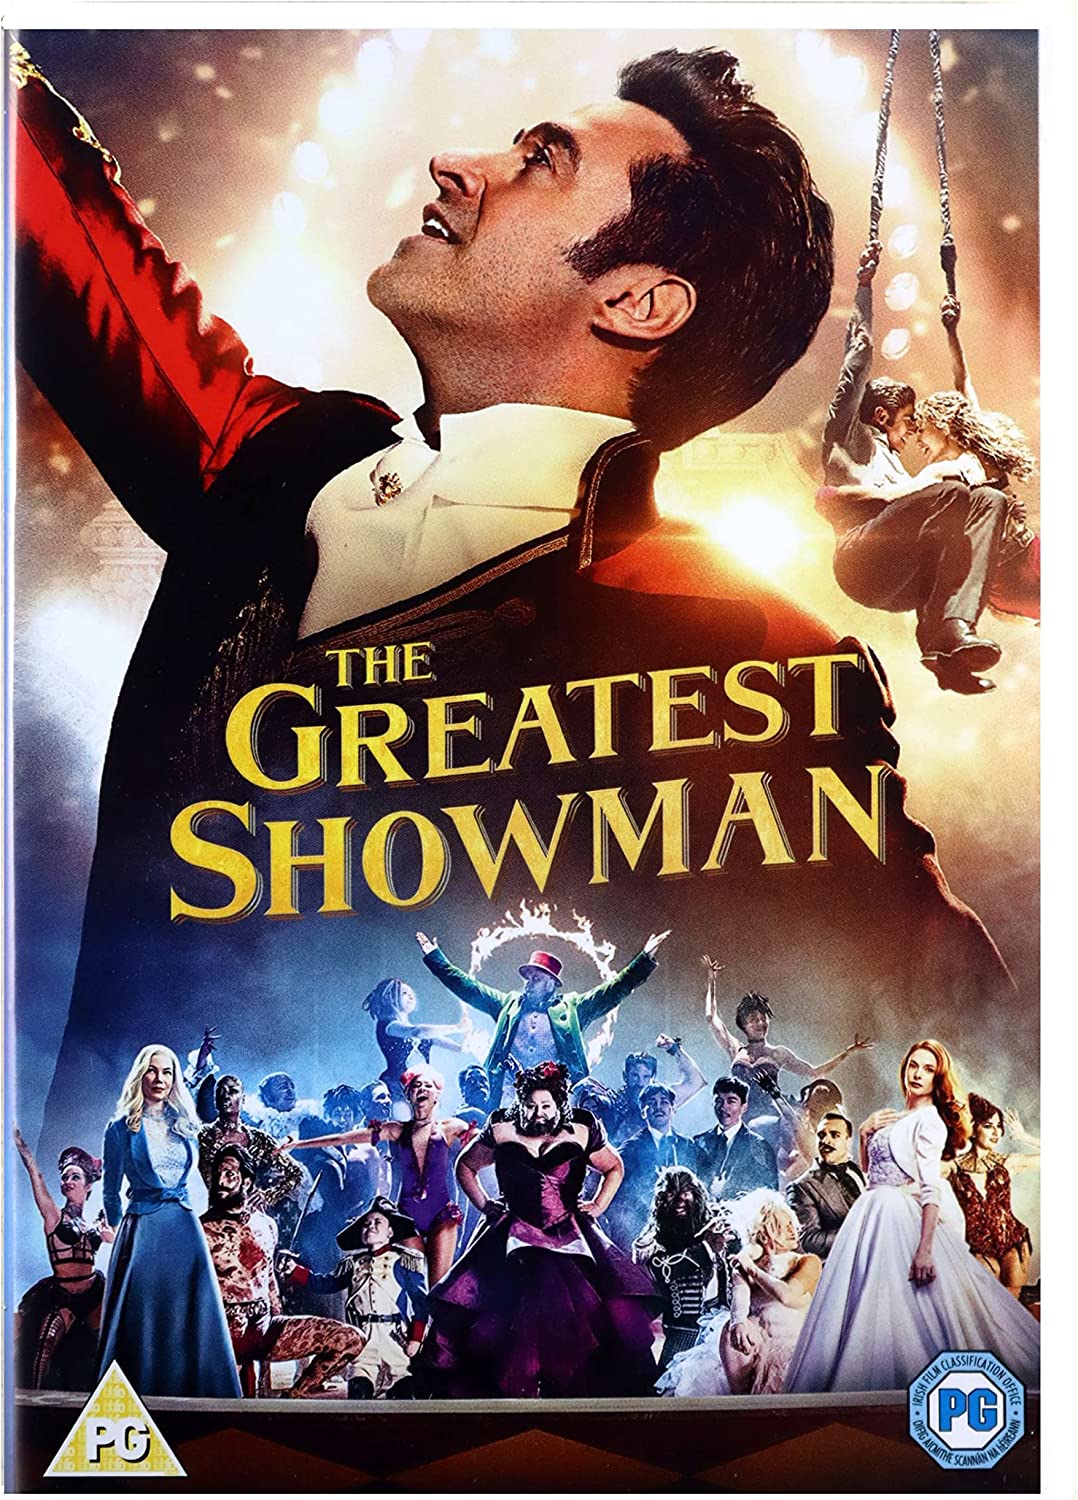 The Greatest Showman DVD PG Rated Sealed RRP £7 CLEARANCE XL £4.99